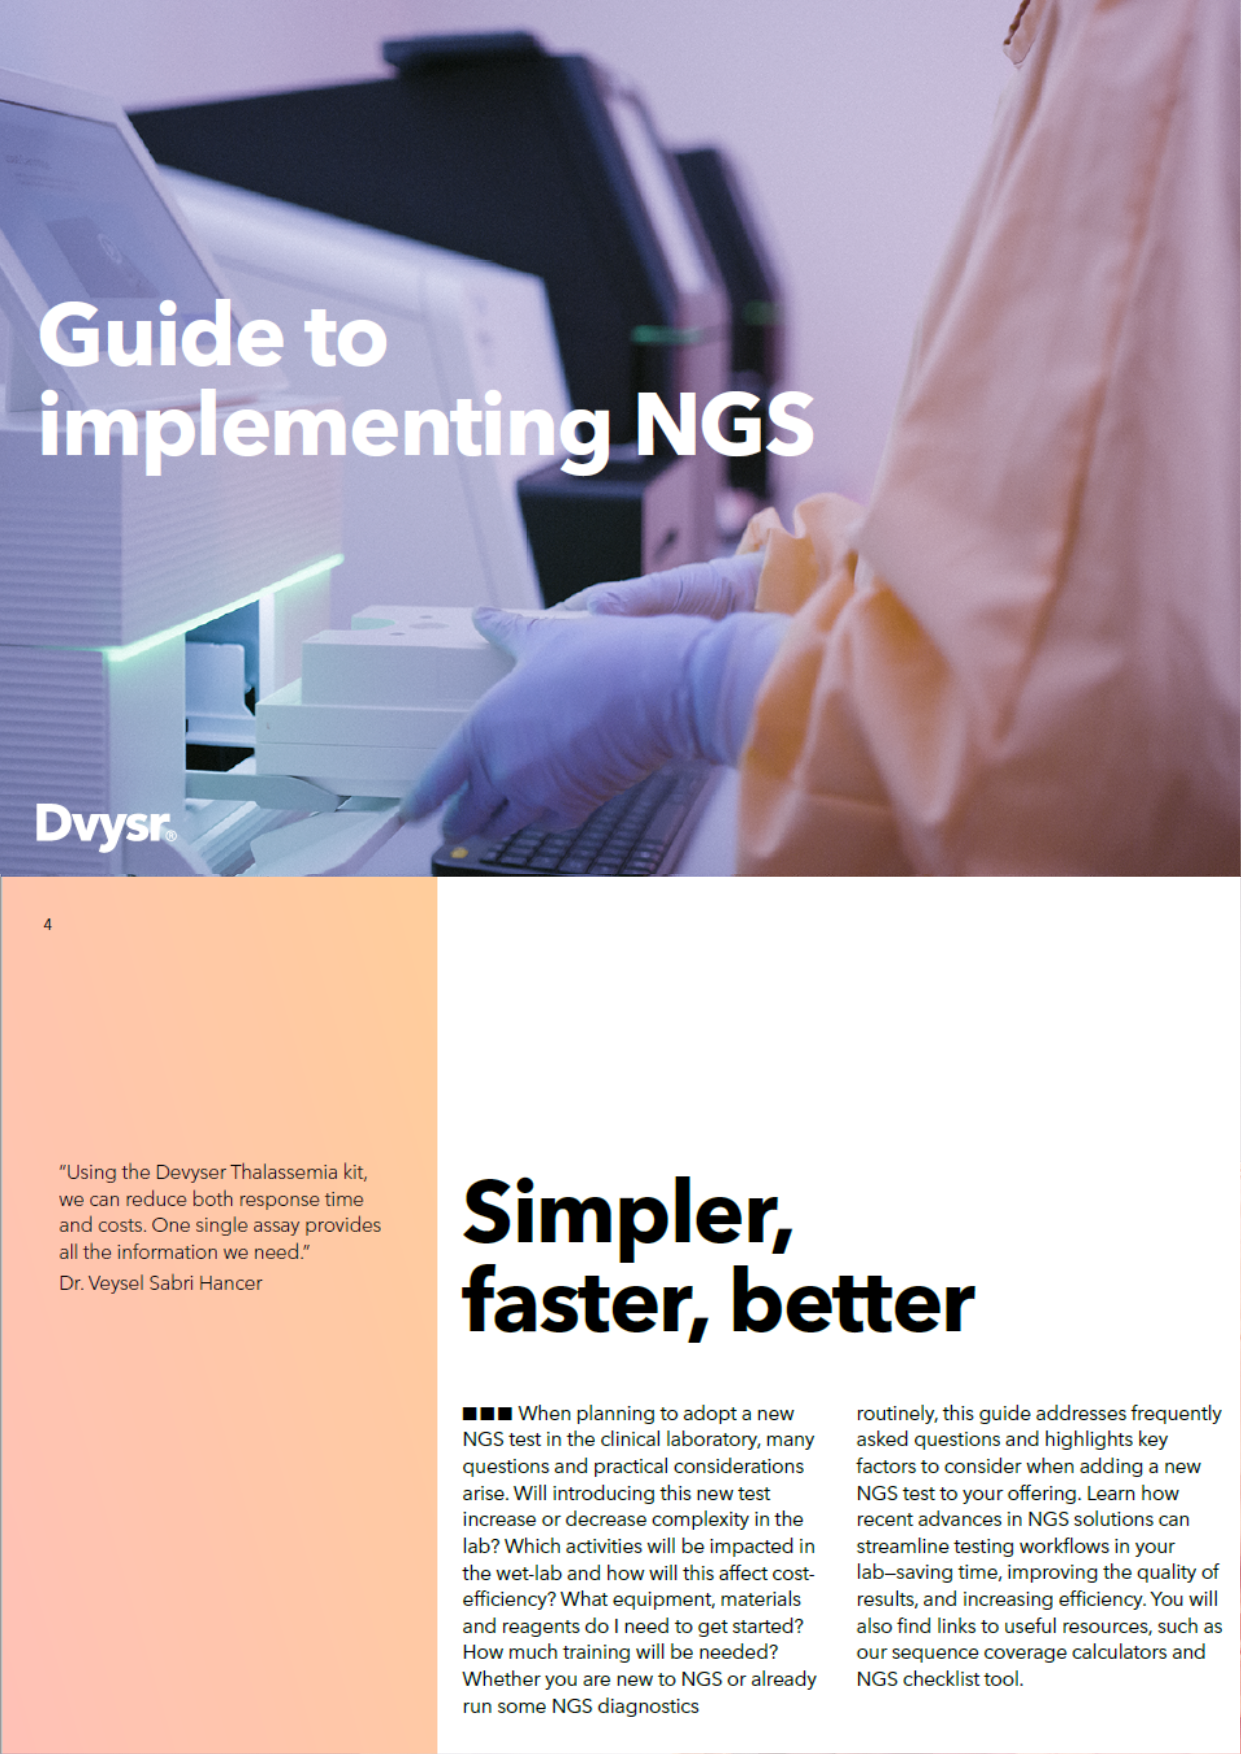 Guide to implementing NGS - simpler, faster, better